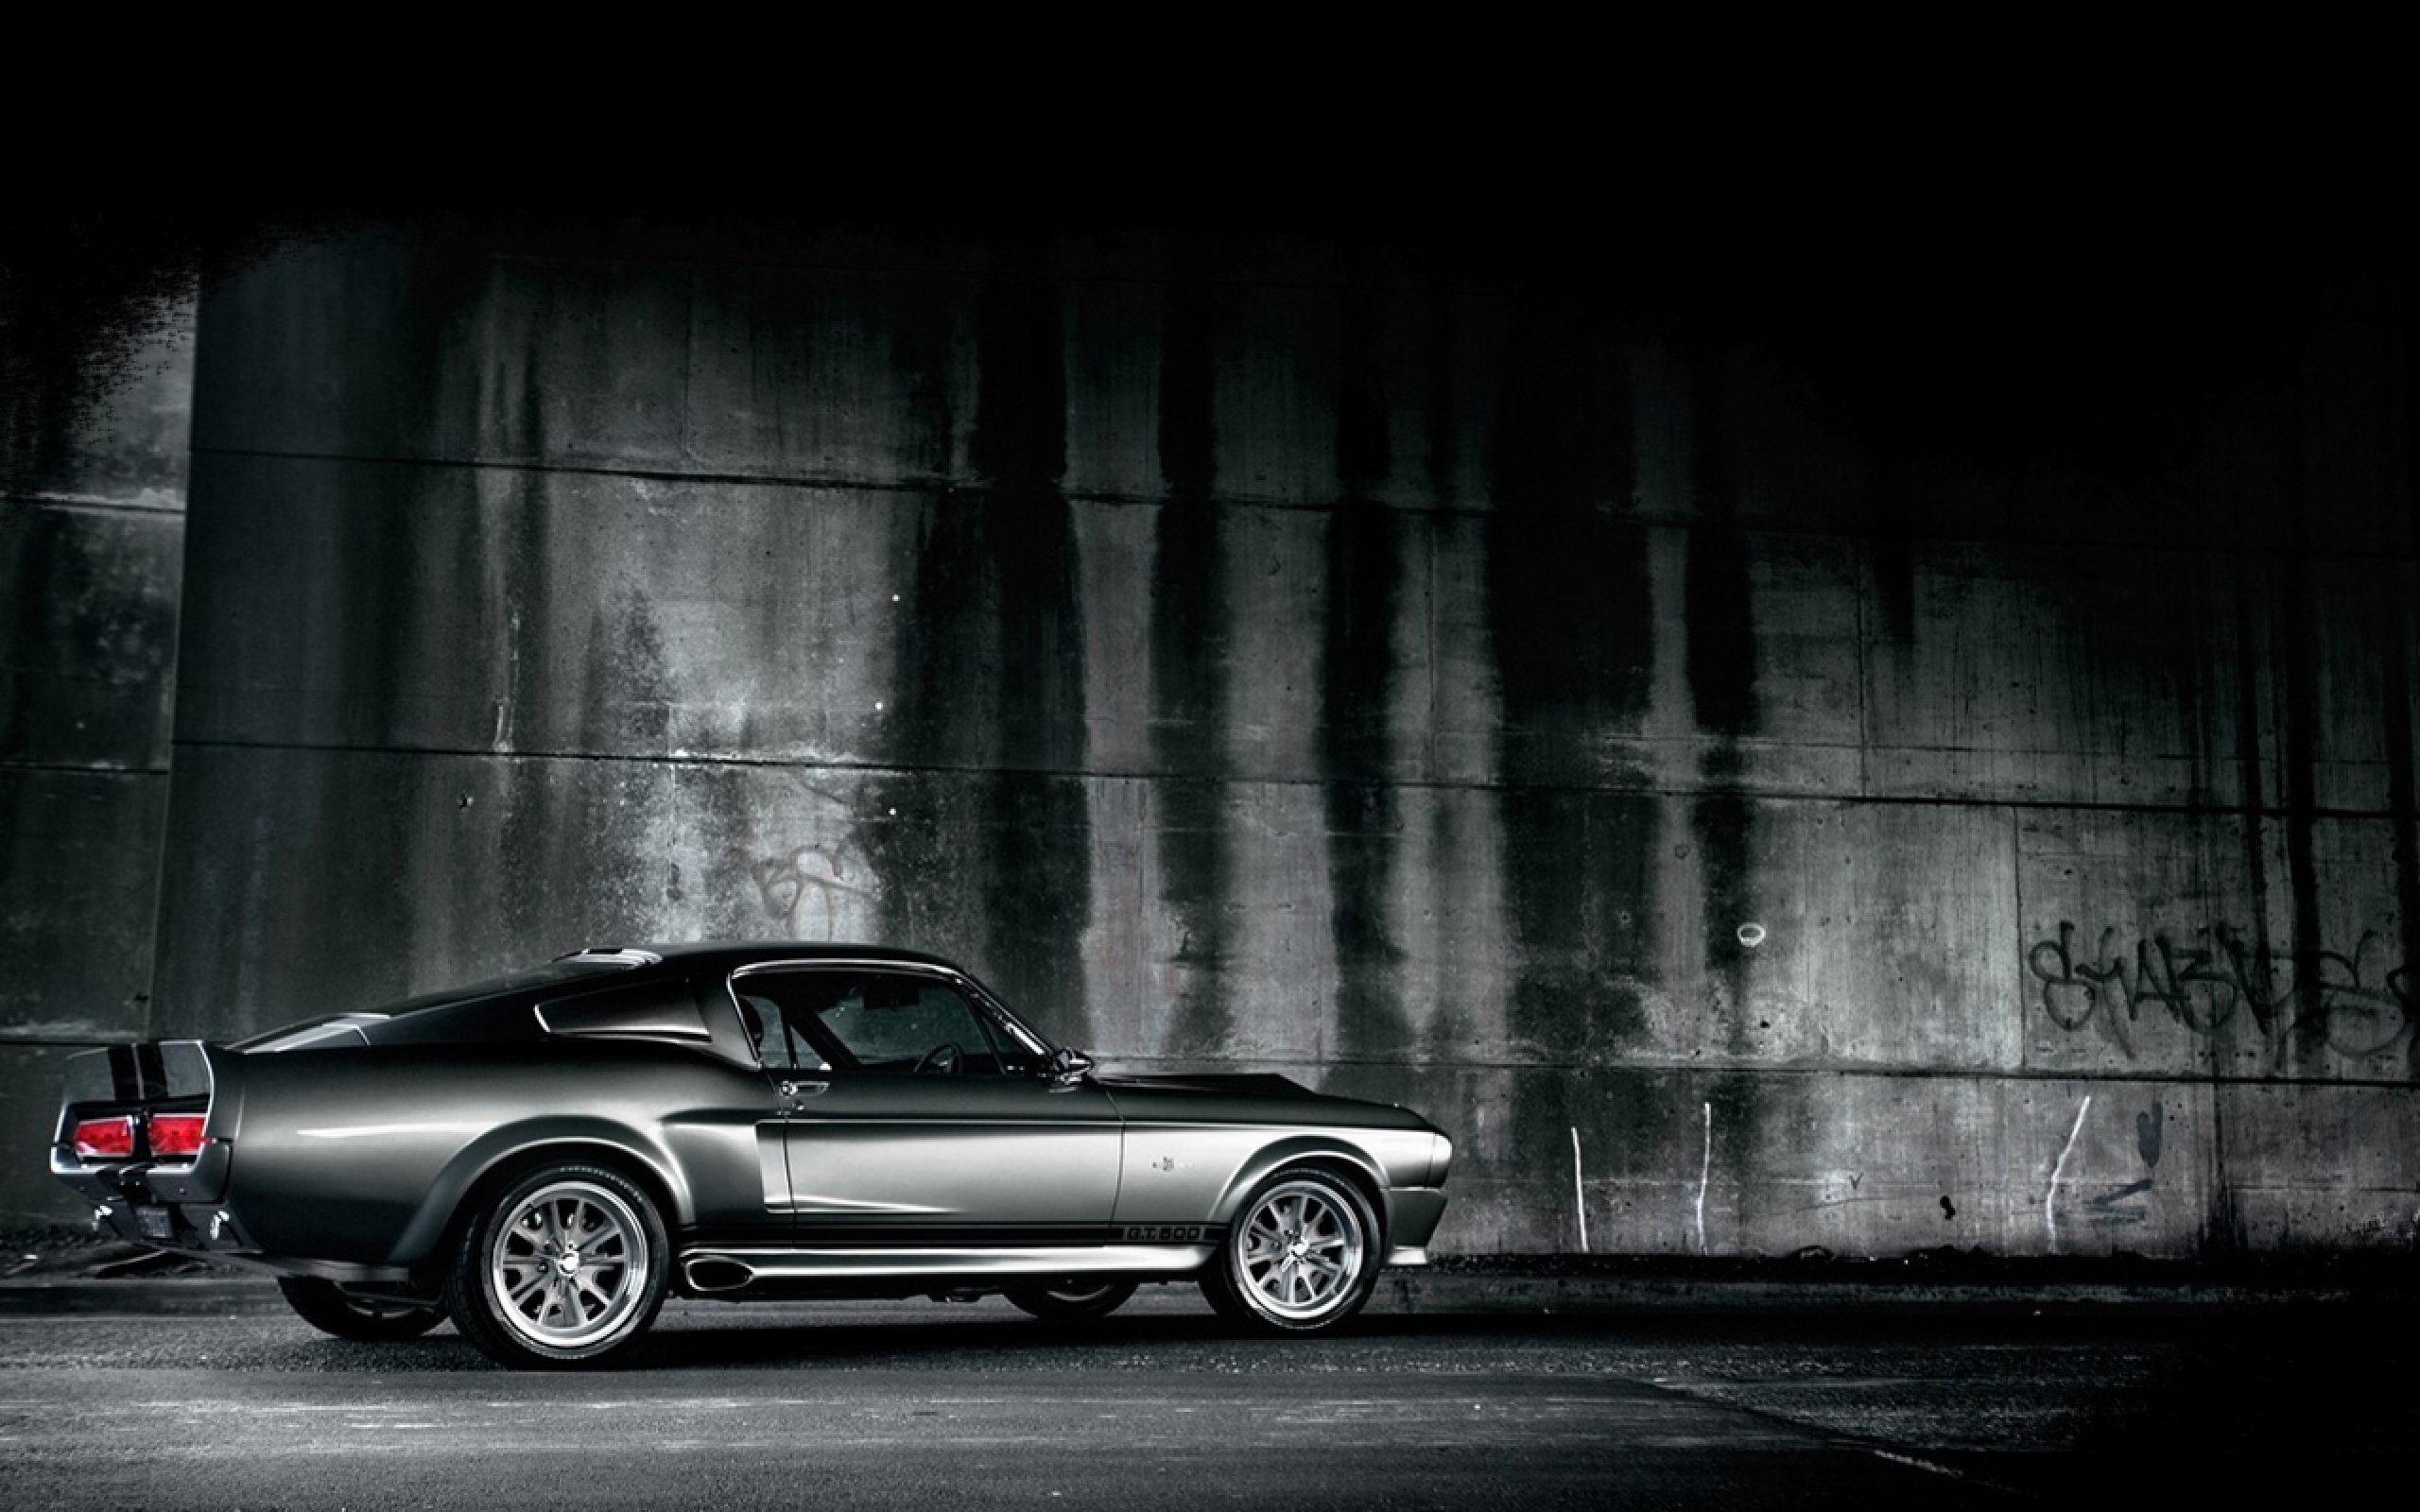 1967 classic cobra eleanor Ford GT500 hot muscle Mustang rod rods Shelby nicolas cage movies wallpaper